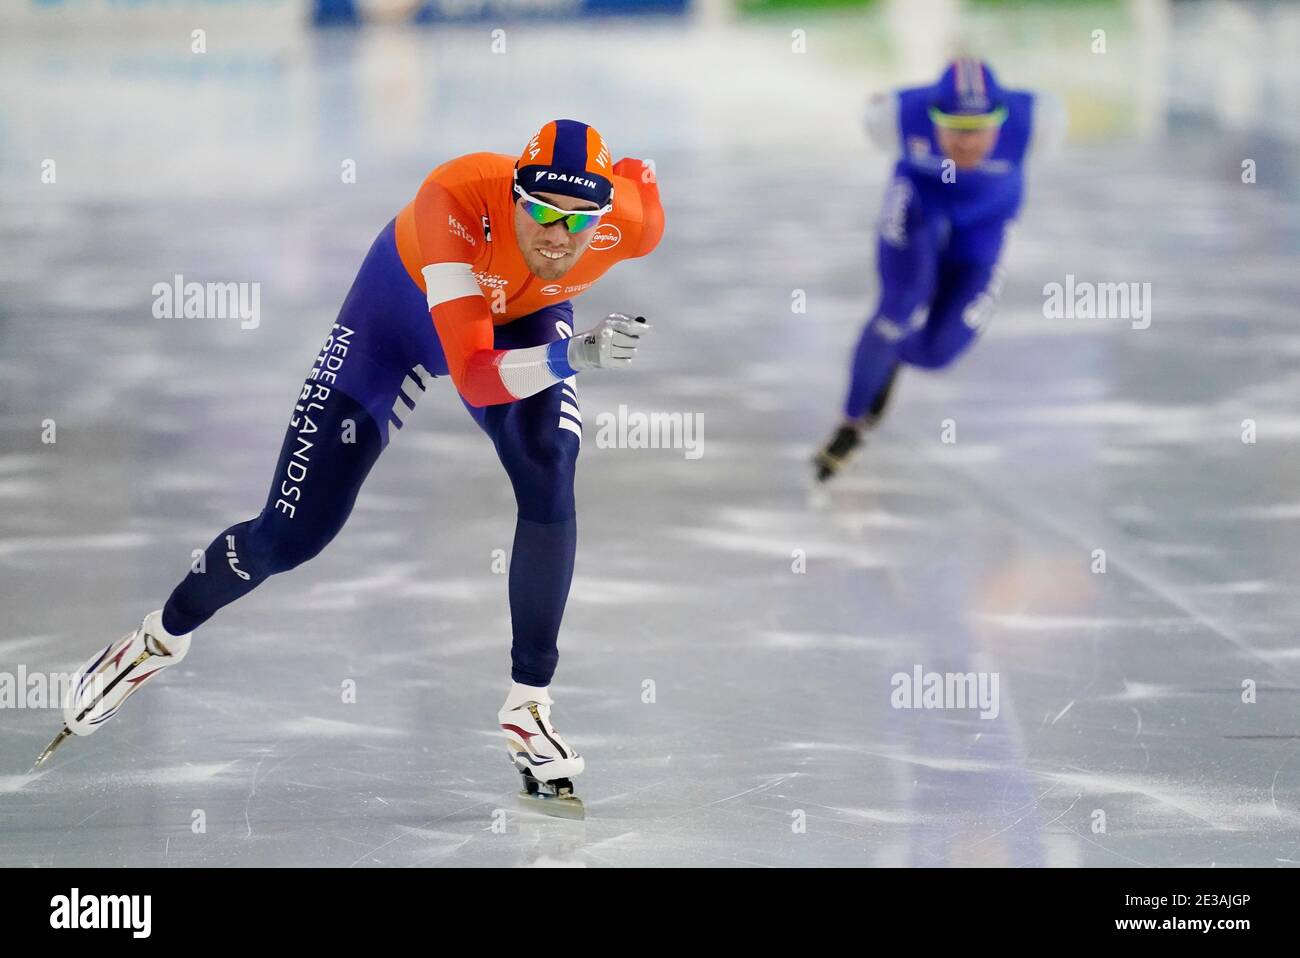 Patrick Roest (NED) vs Sverre Lunde Pedersen (NOR) on 1500 meters during European Championship Allround and Sprint on January, 17 2021 in Heerenveen Netherlands Credit: SCS/Soenar Chamid/AFLO/Alamy Live News Stock Photo